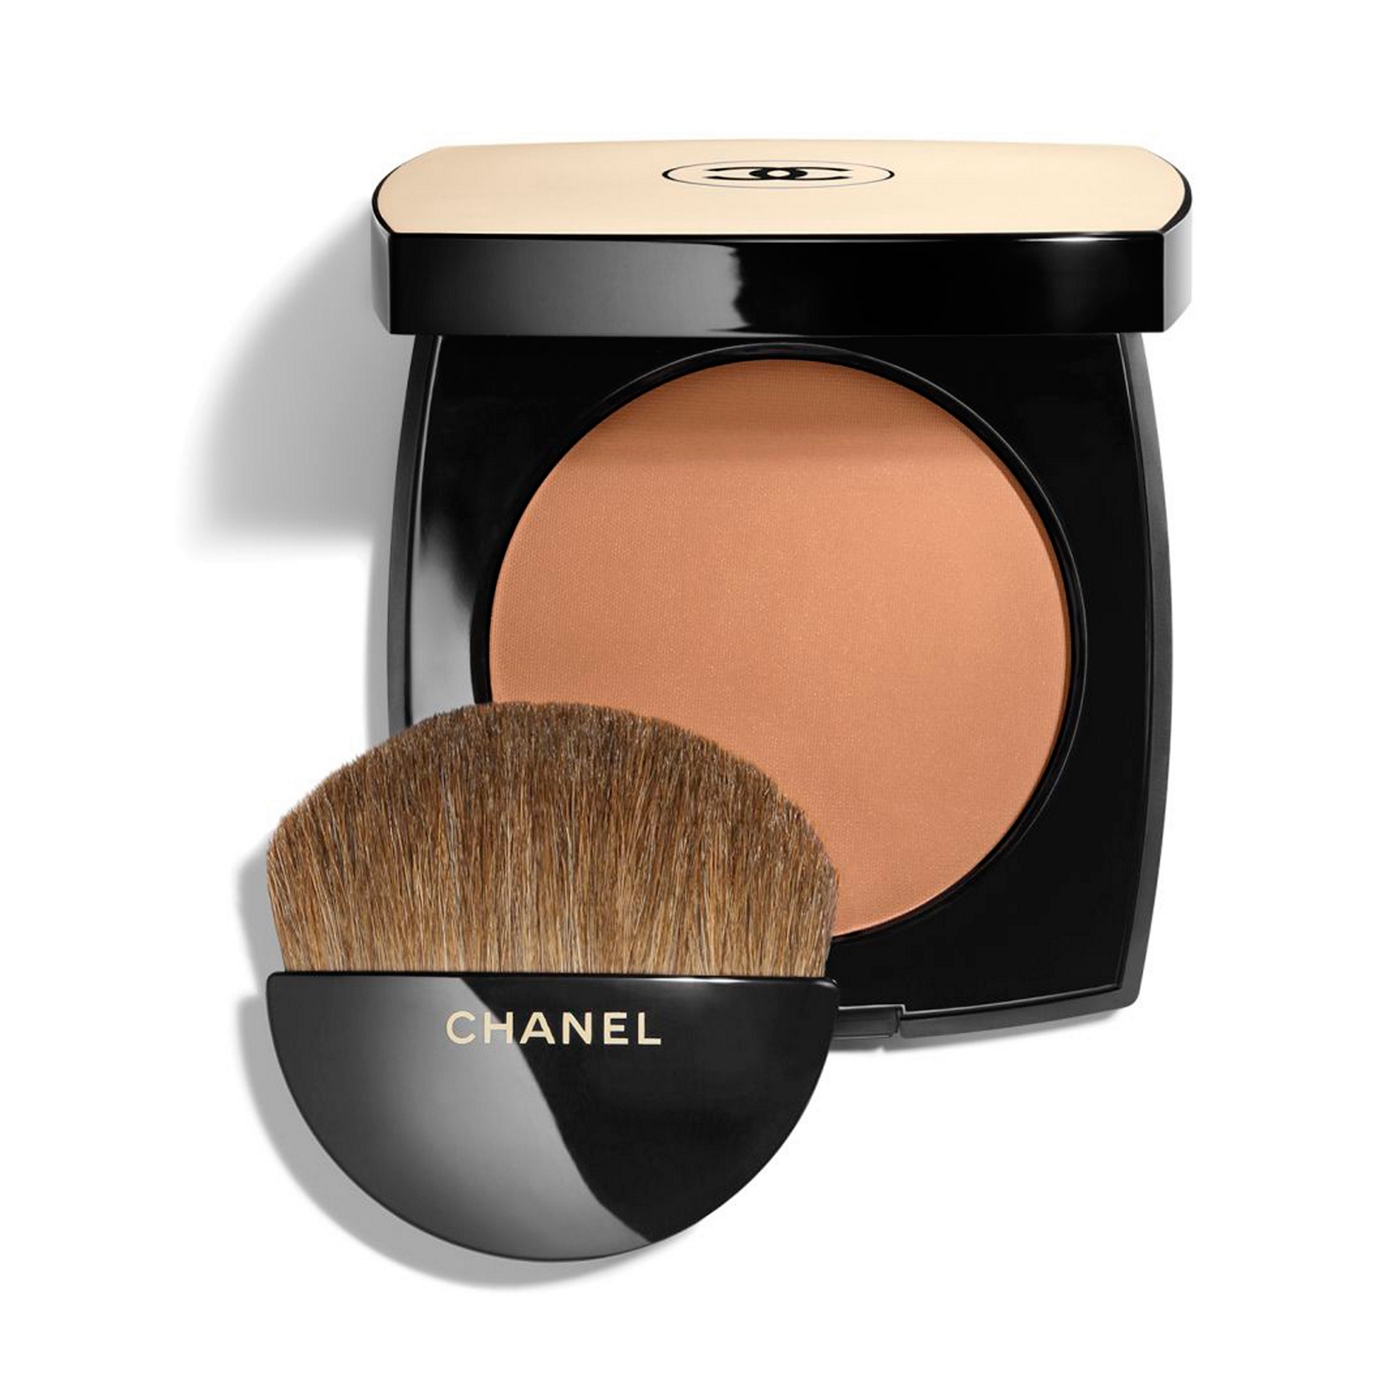 CHANEL LES BEIGES Healthy Glow Sheer Powder SPF 15 / PA++